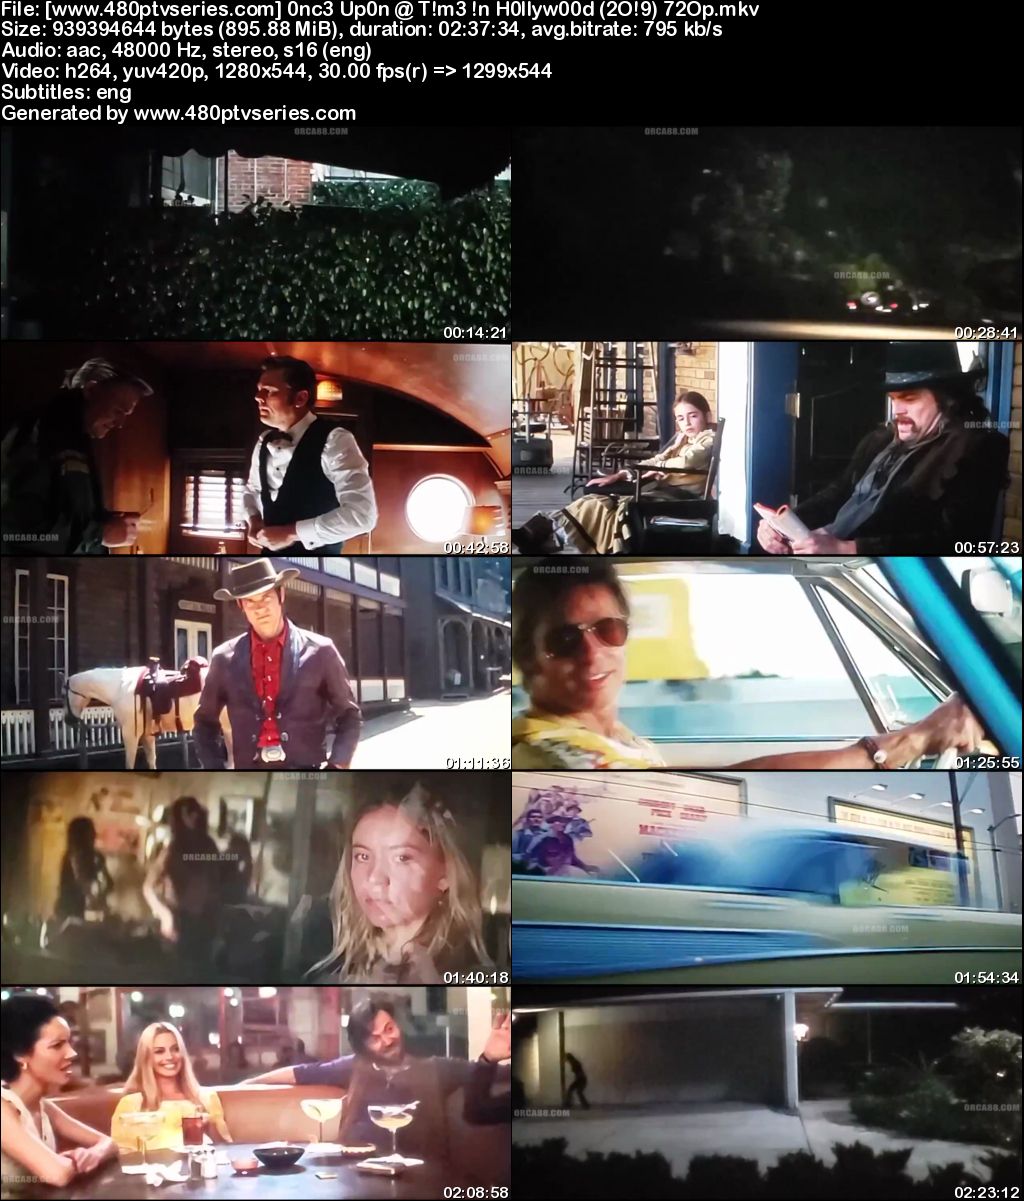 Watch Online Free Once Upon a Time In Hollywood (2019) Full English Movie Download 720p 480p HD